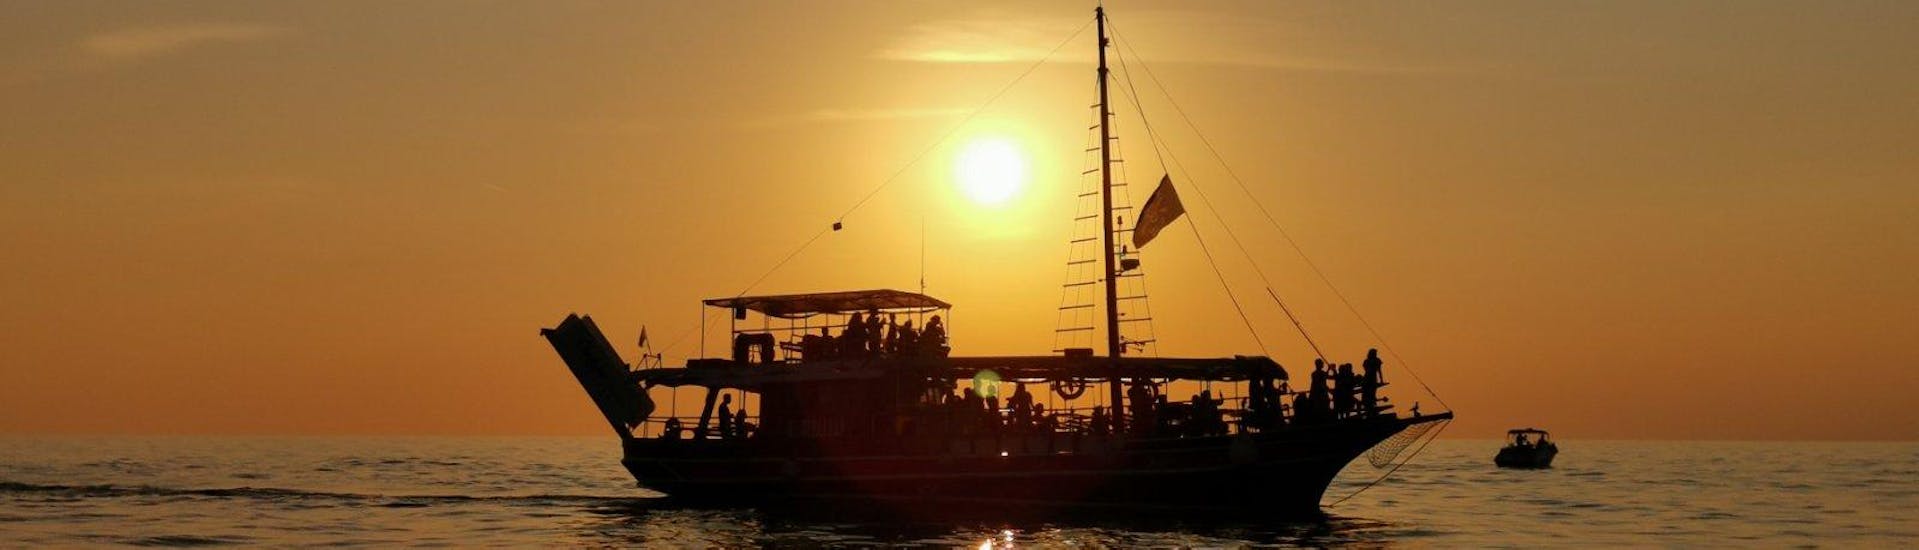 The sky turns orange during the Sunset Boat Trip of the Poreč Riviera with Dolphin Watching organized by Kristofor Boat Excursions Poreč.